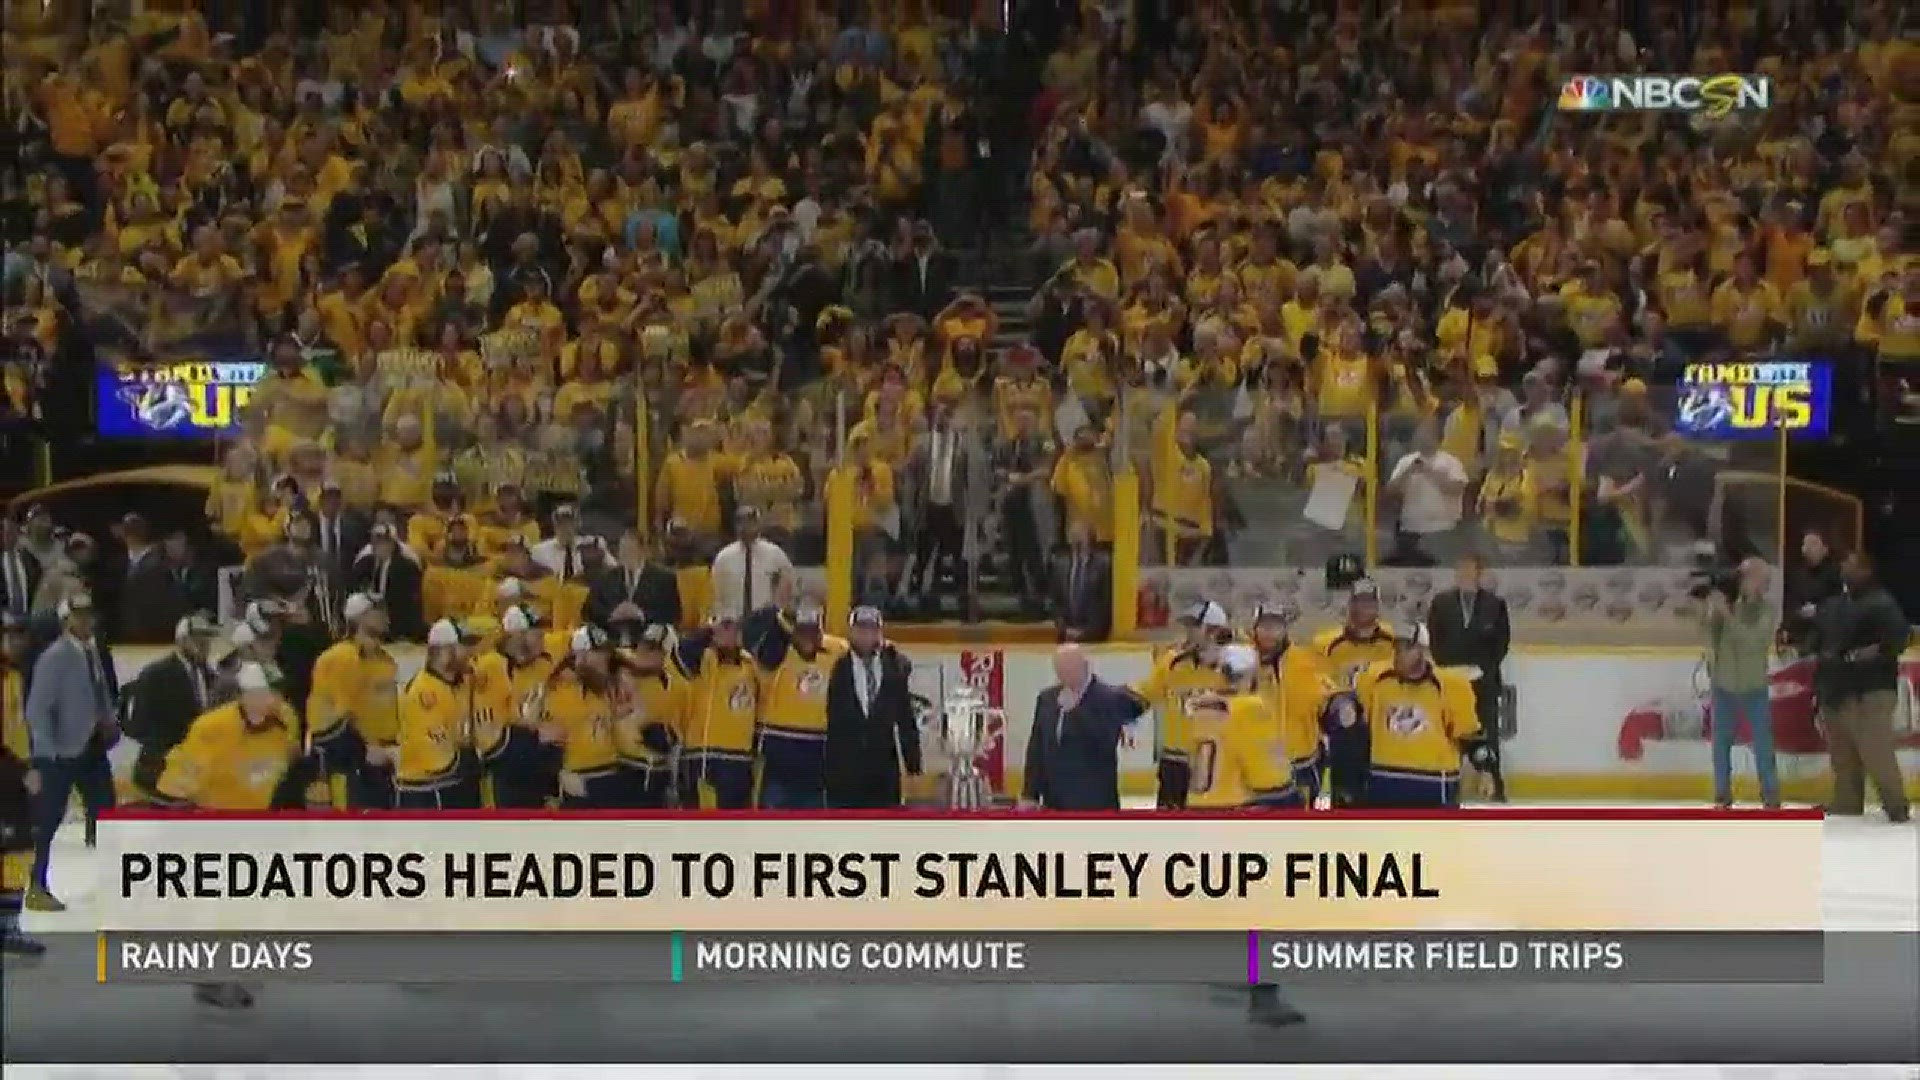 May 23, 2017: For the first time ever, the Nashville Predators are heading to the Stanley Cup Final.